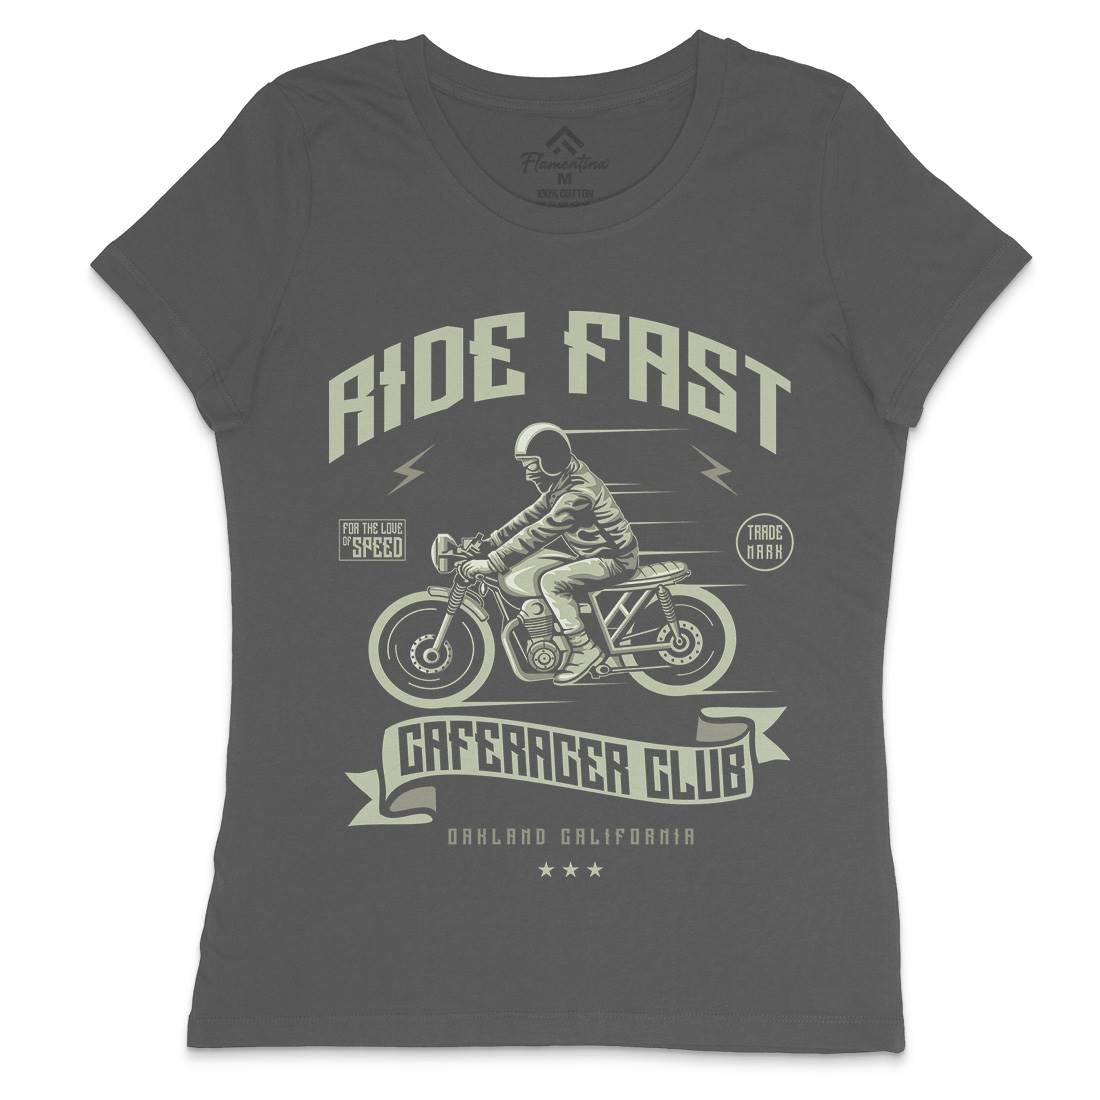 Ride Fast Womens Crew Neck T-Shirt Motorcycles A117